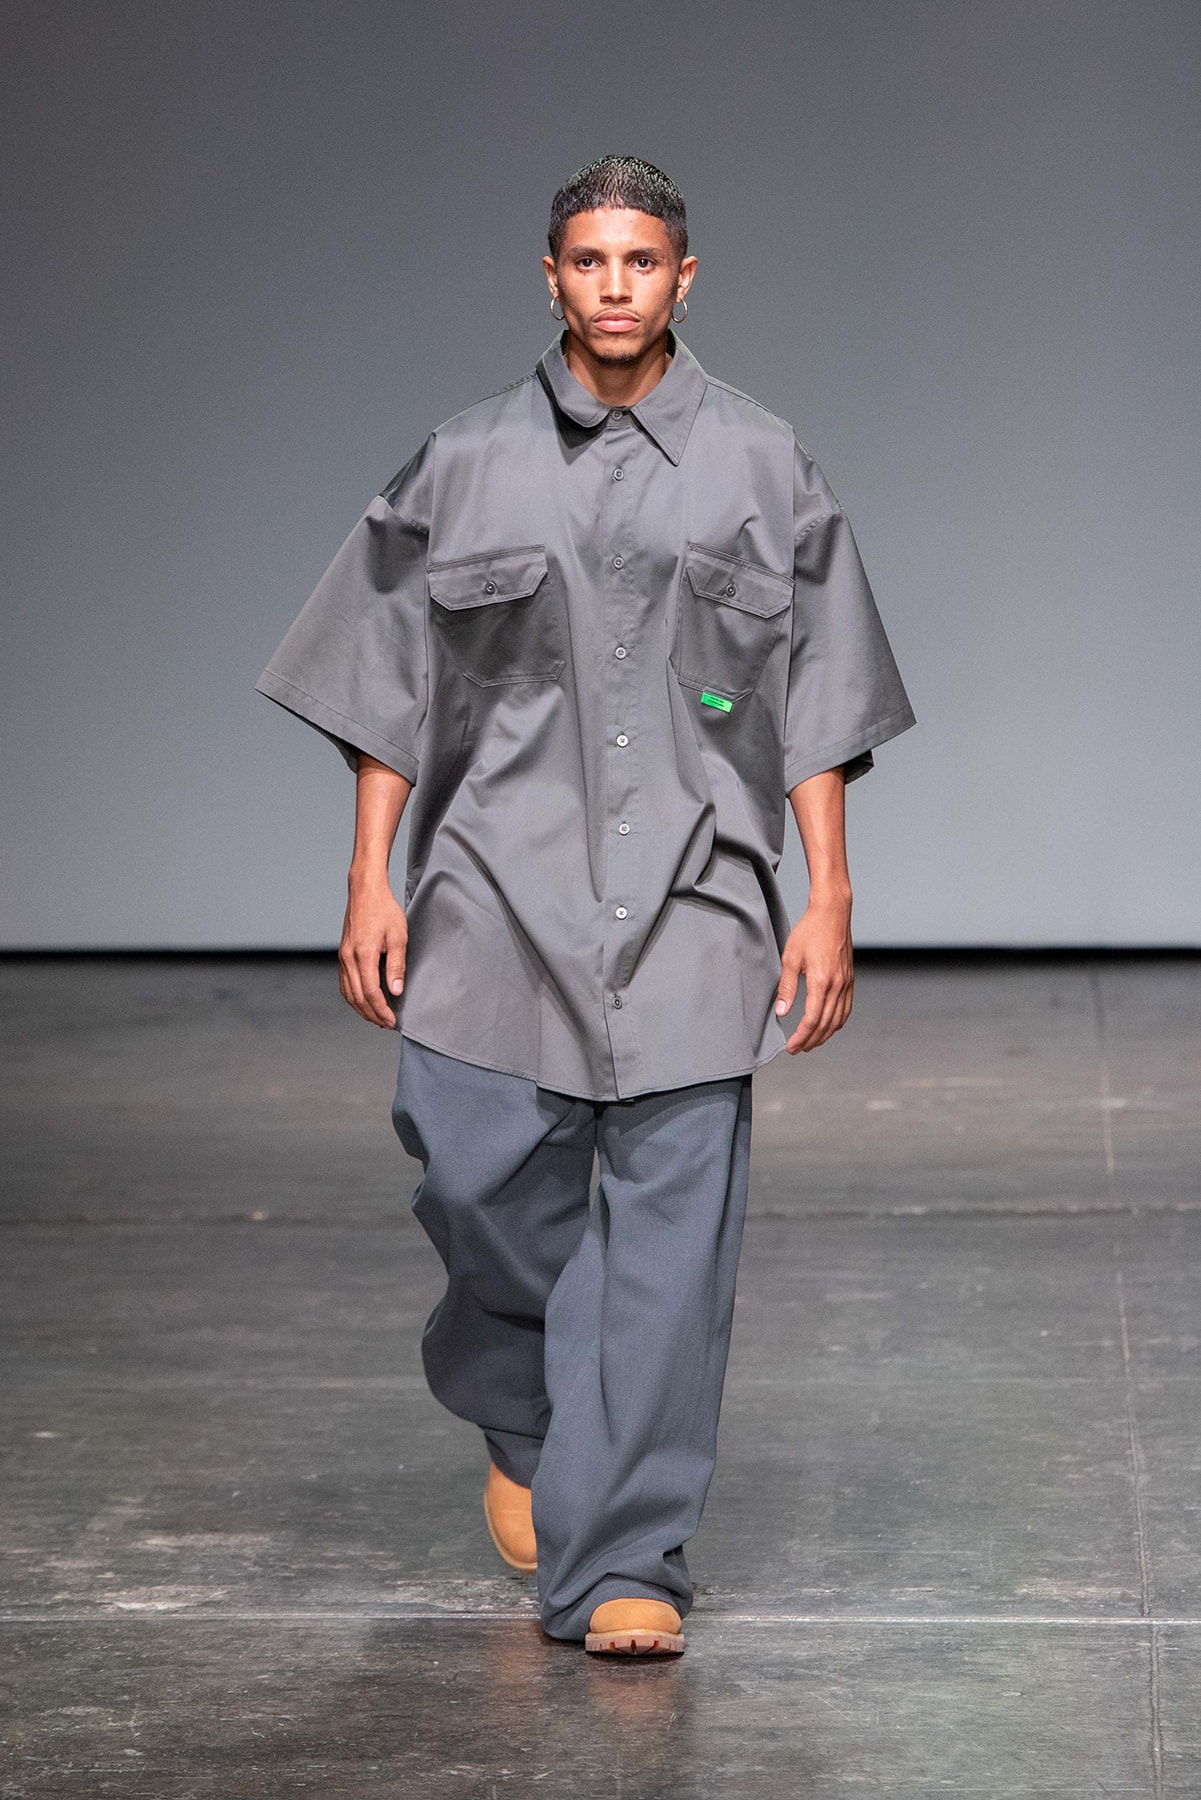 willy chavarria new york runway fashion week spring summer 2019 collection menswear